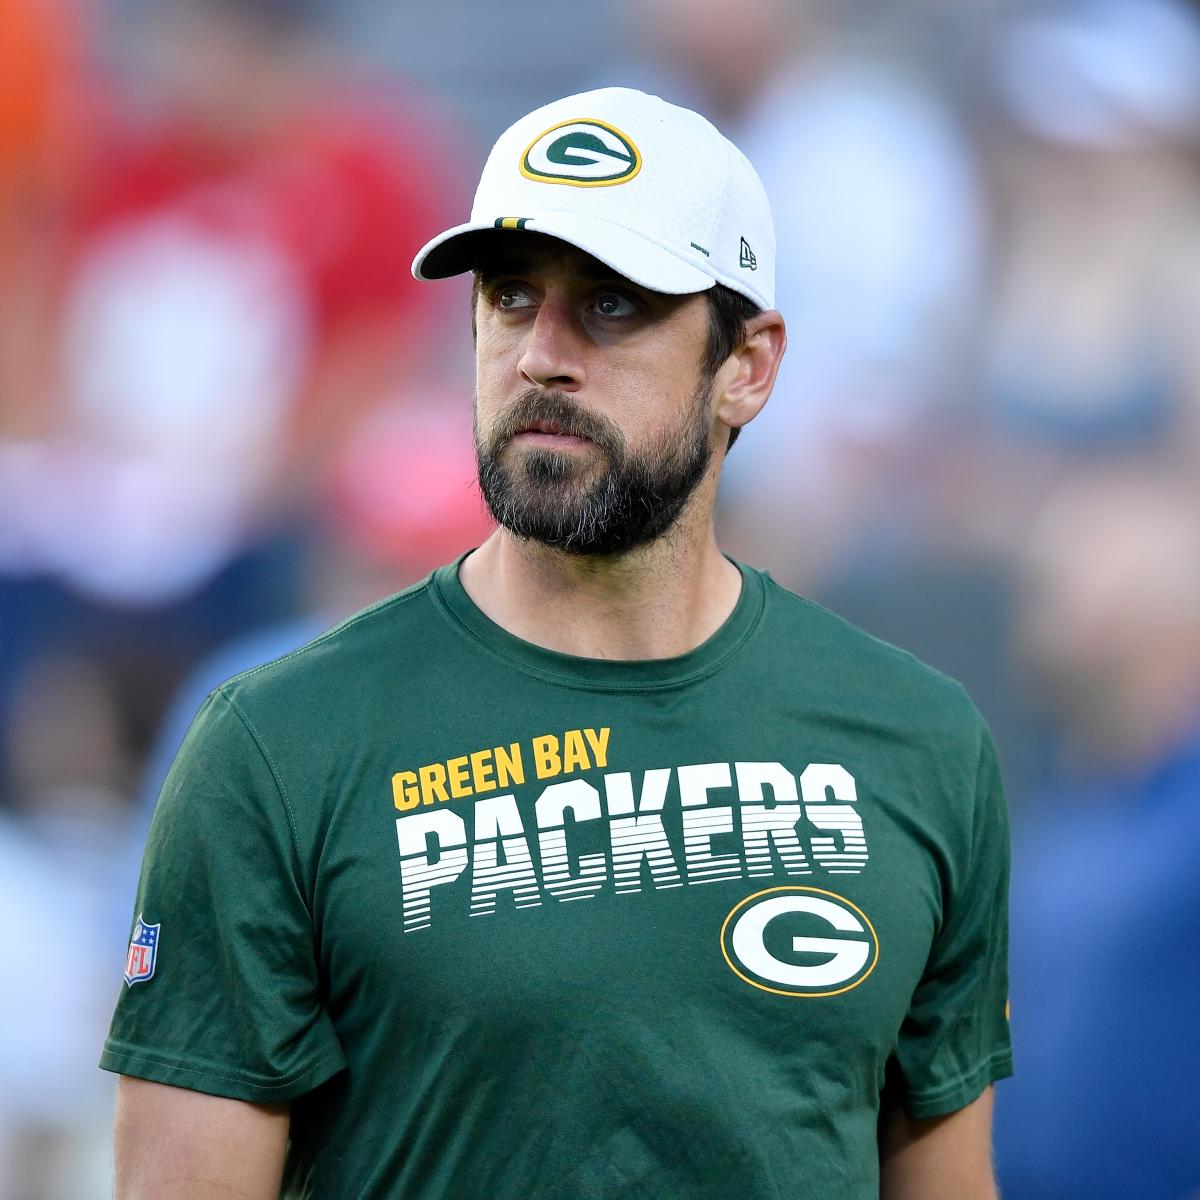 Side-by-side: Packers quarterbacks as Happy Gilmore characters